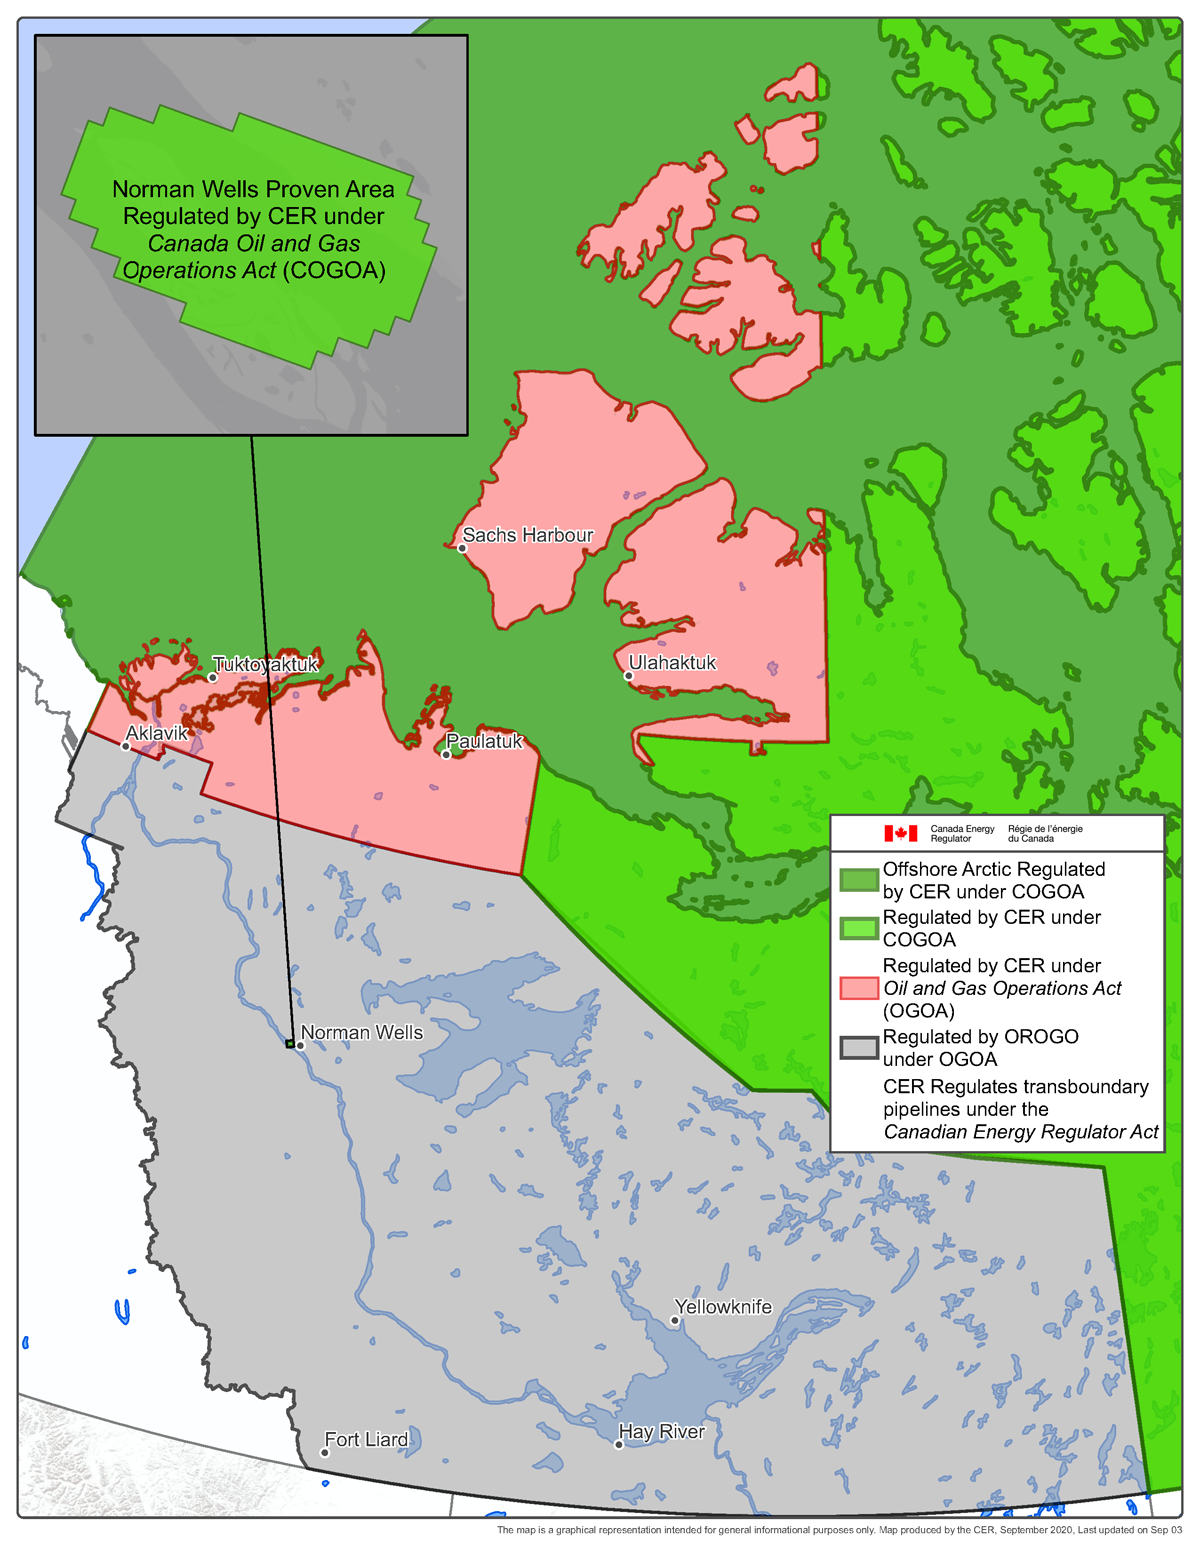 Map - Normal Wells Proven Area Regulated by CER under Canada Oil and Gas Operations Act (COGOA)